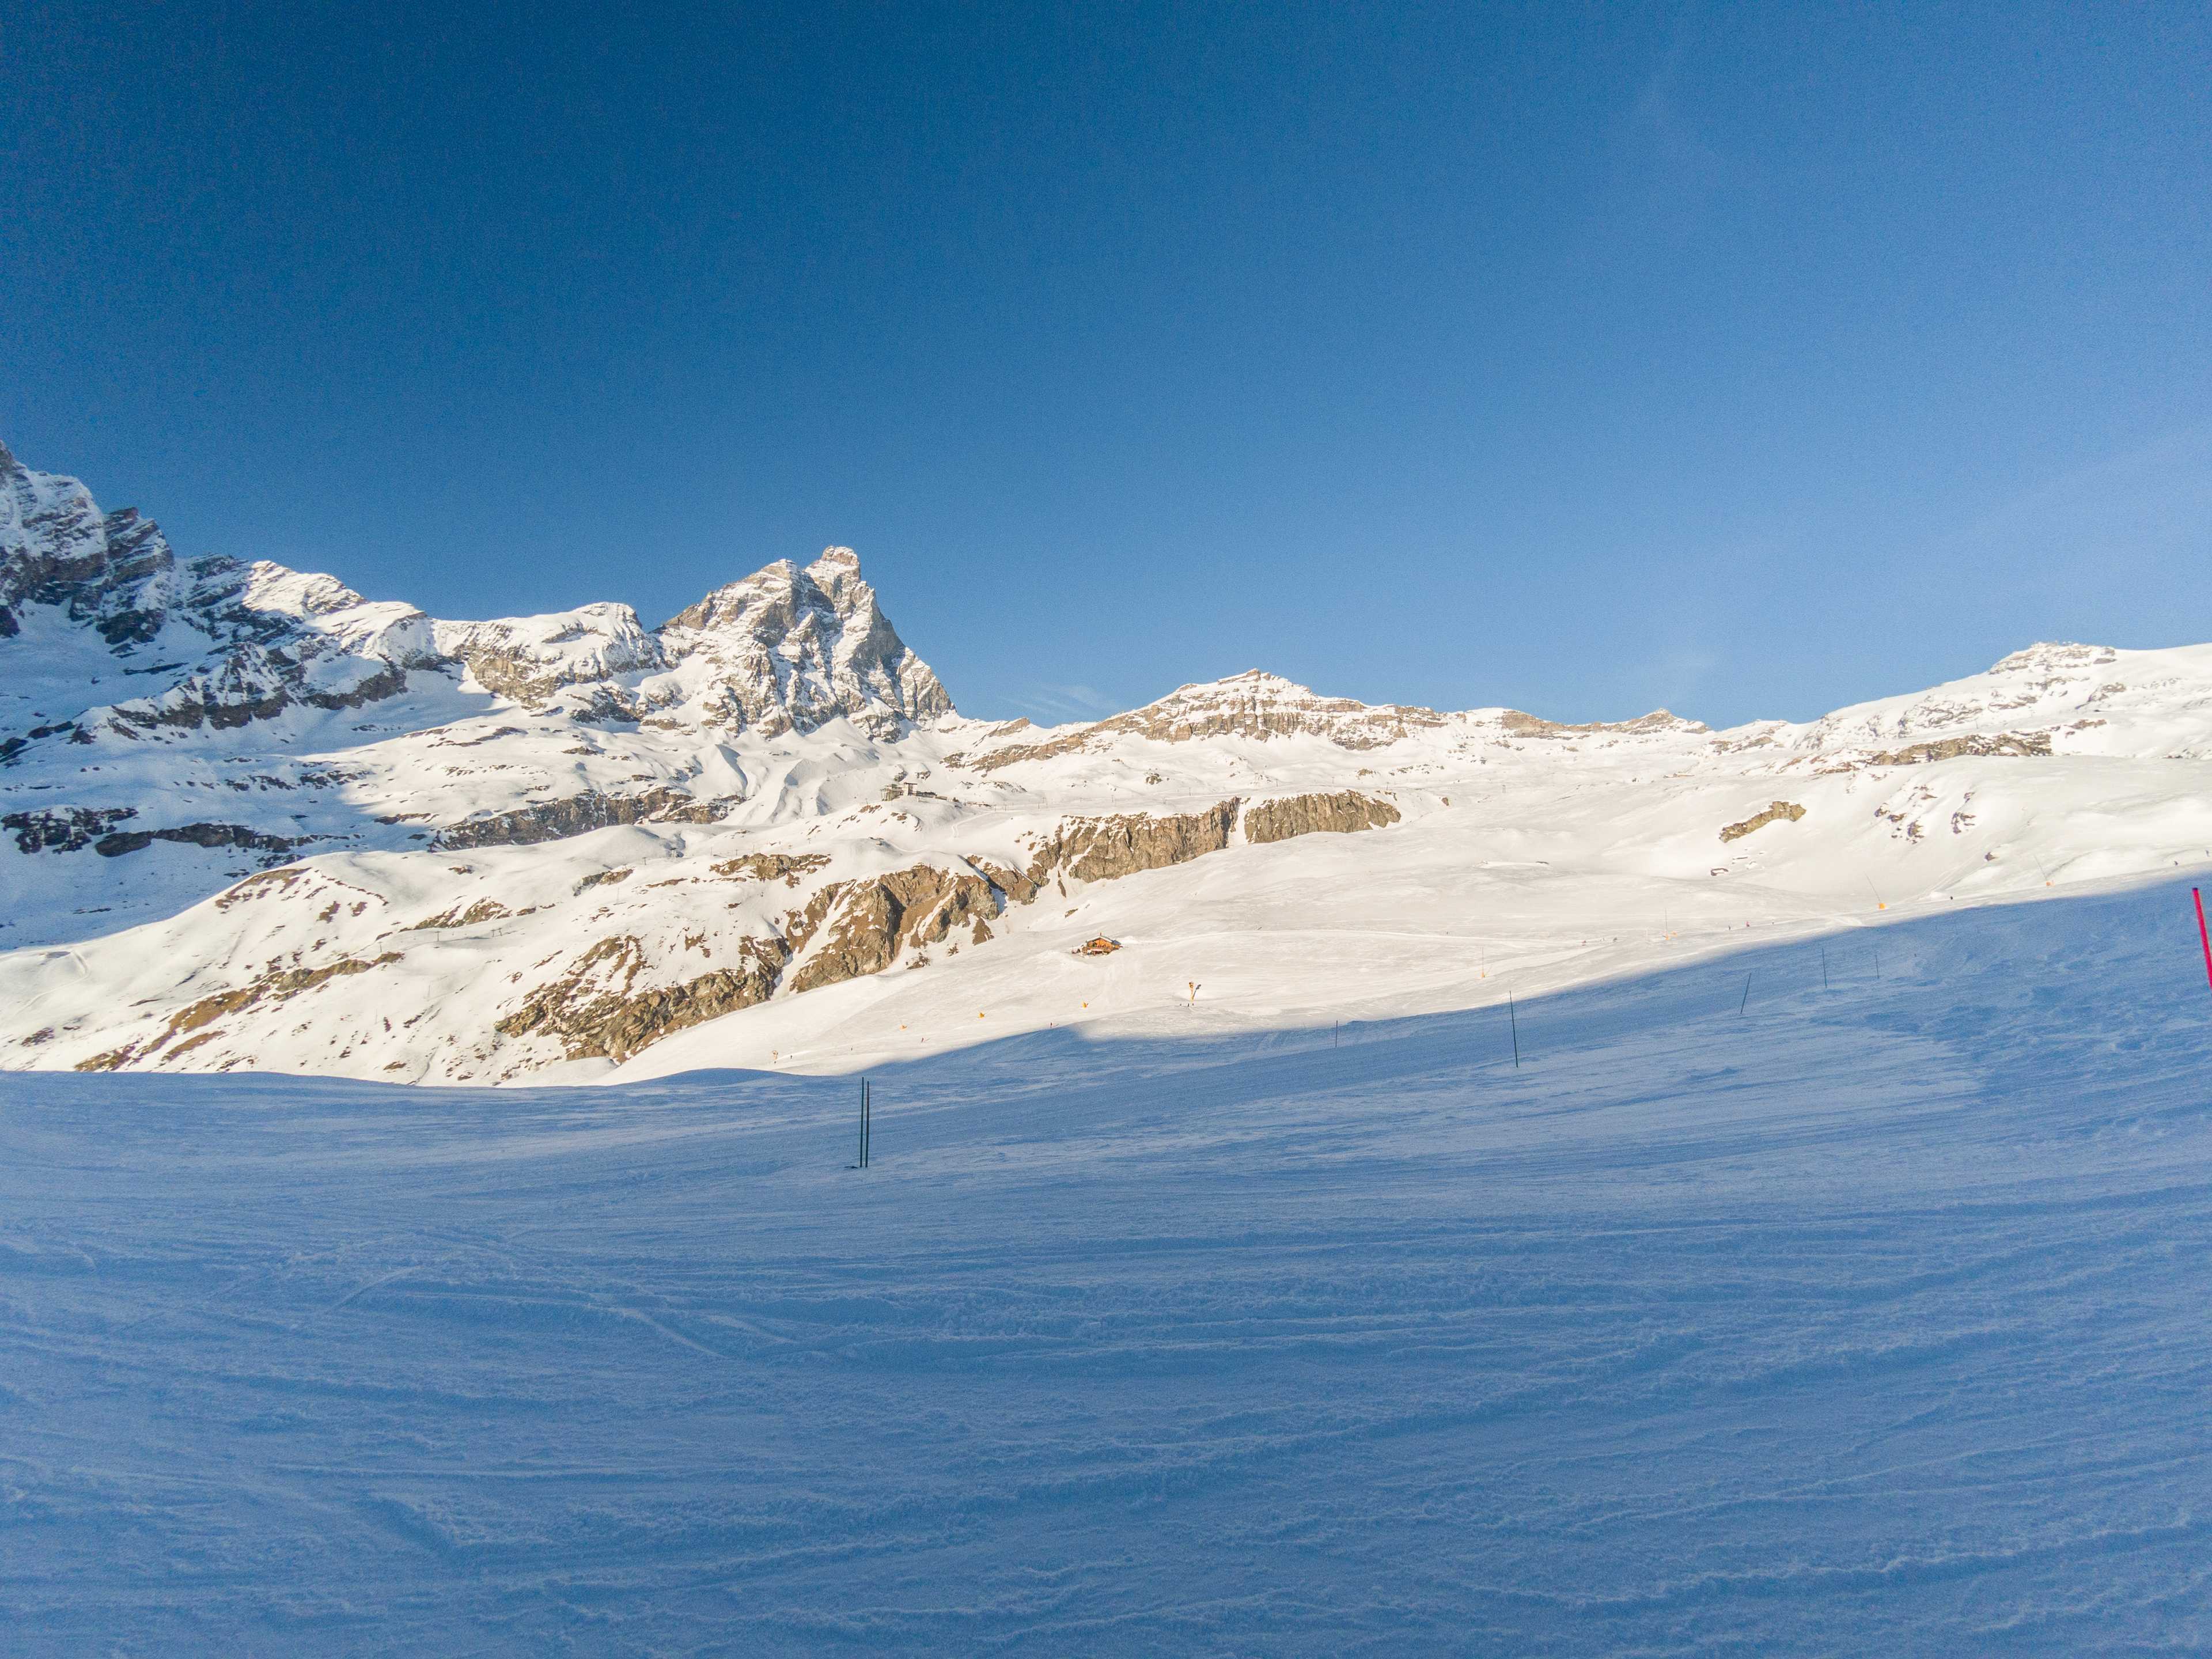 The view from piste no. 7.0, Cervinia